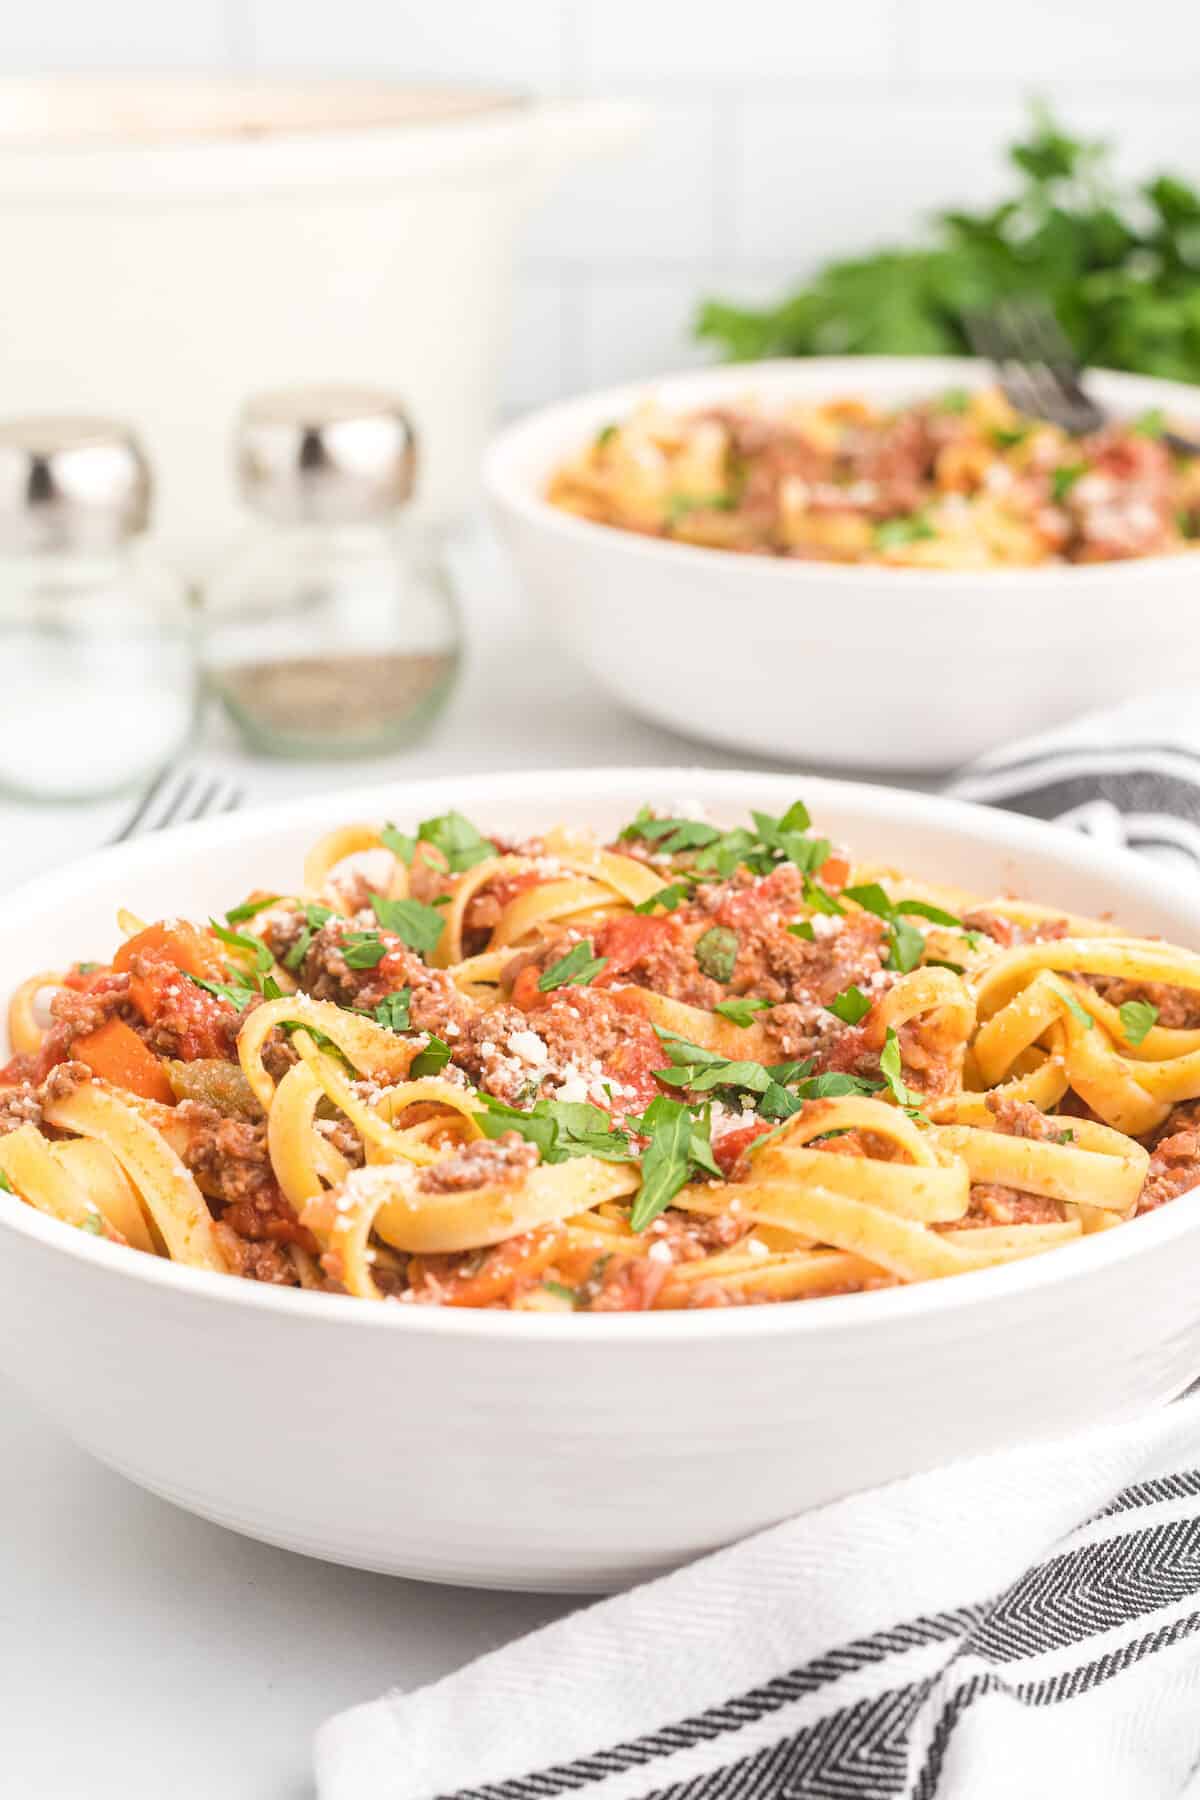 bolognese sauce combined with pasta noodles in a white bowl.